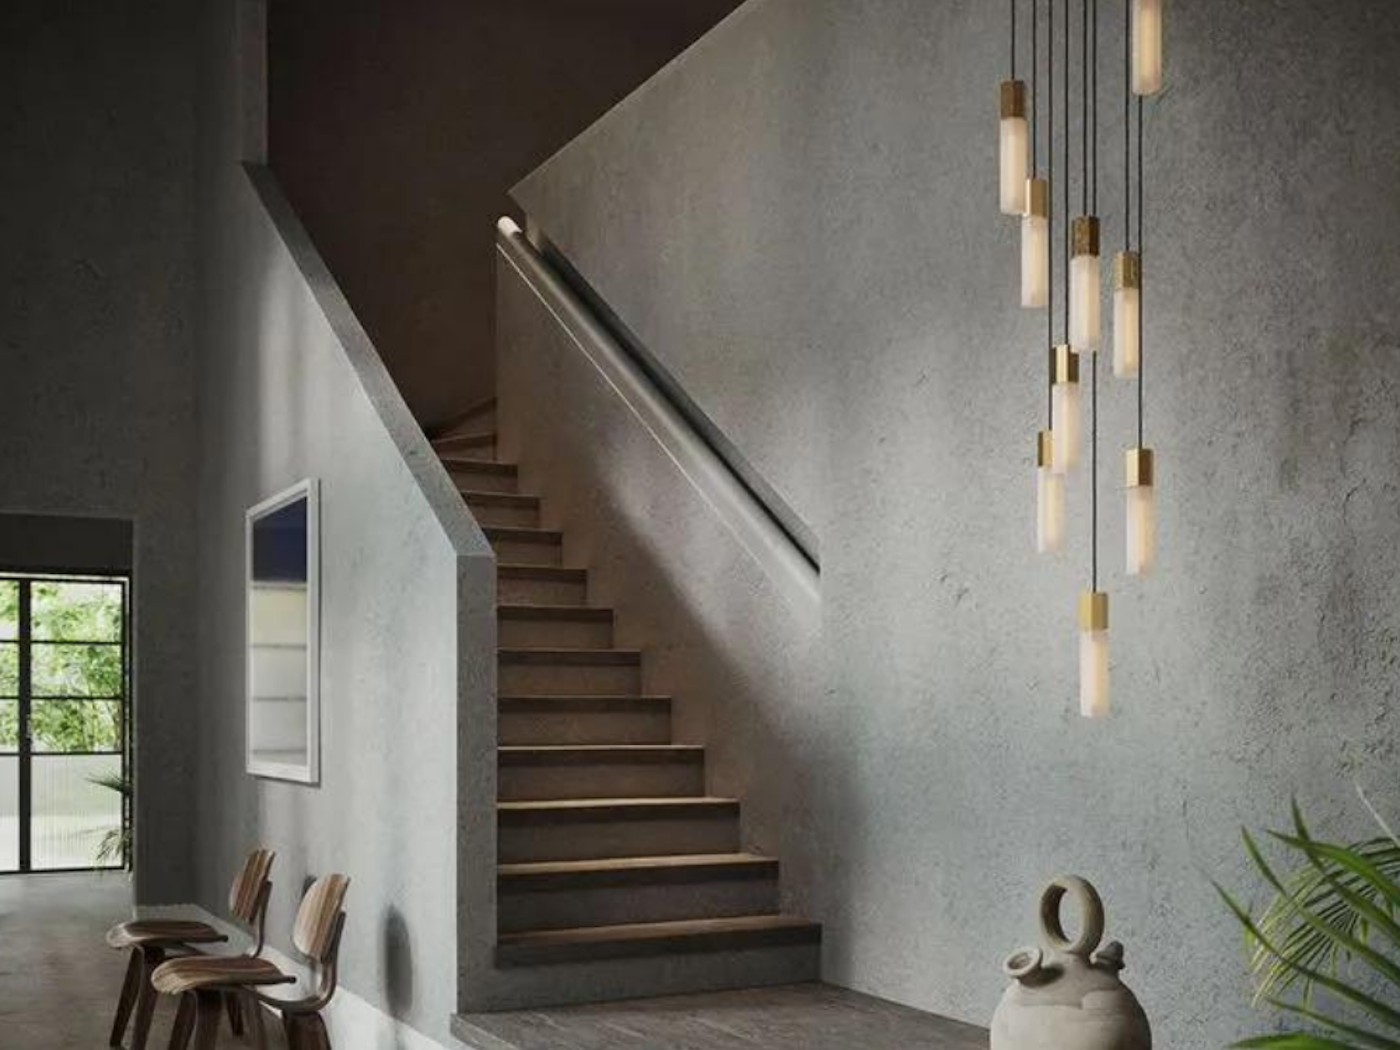 The Basalt nine pendant light by Tala can be ordered from Heal’s for £2350.  